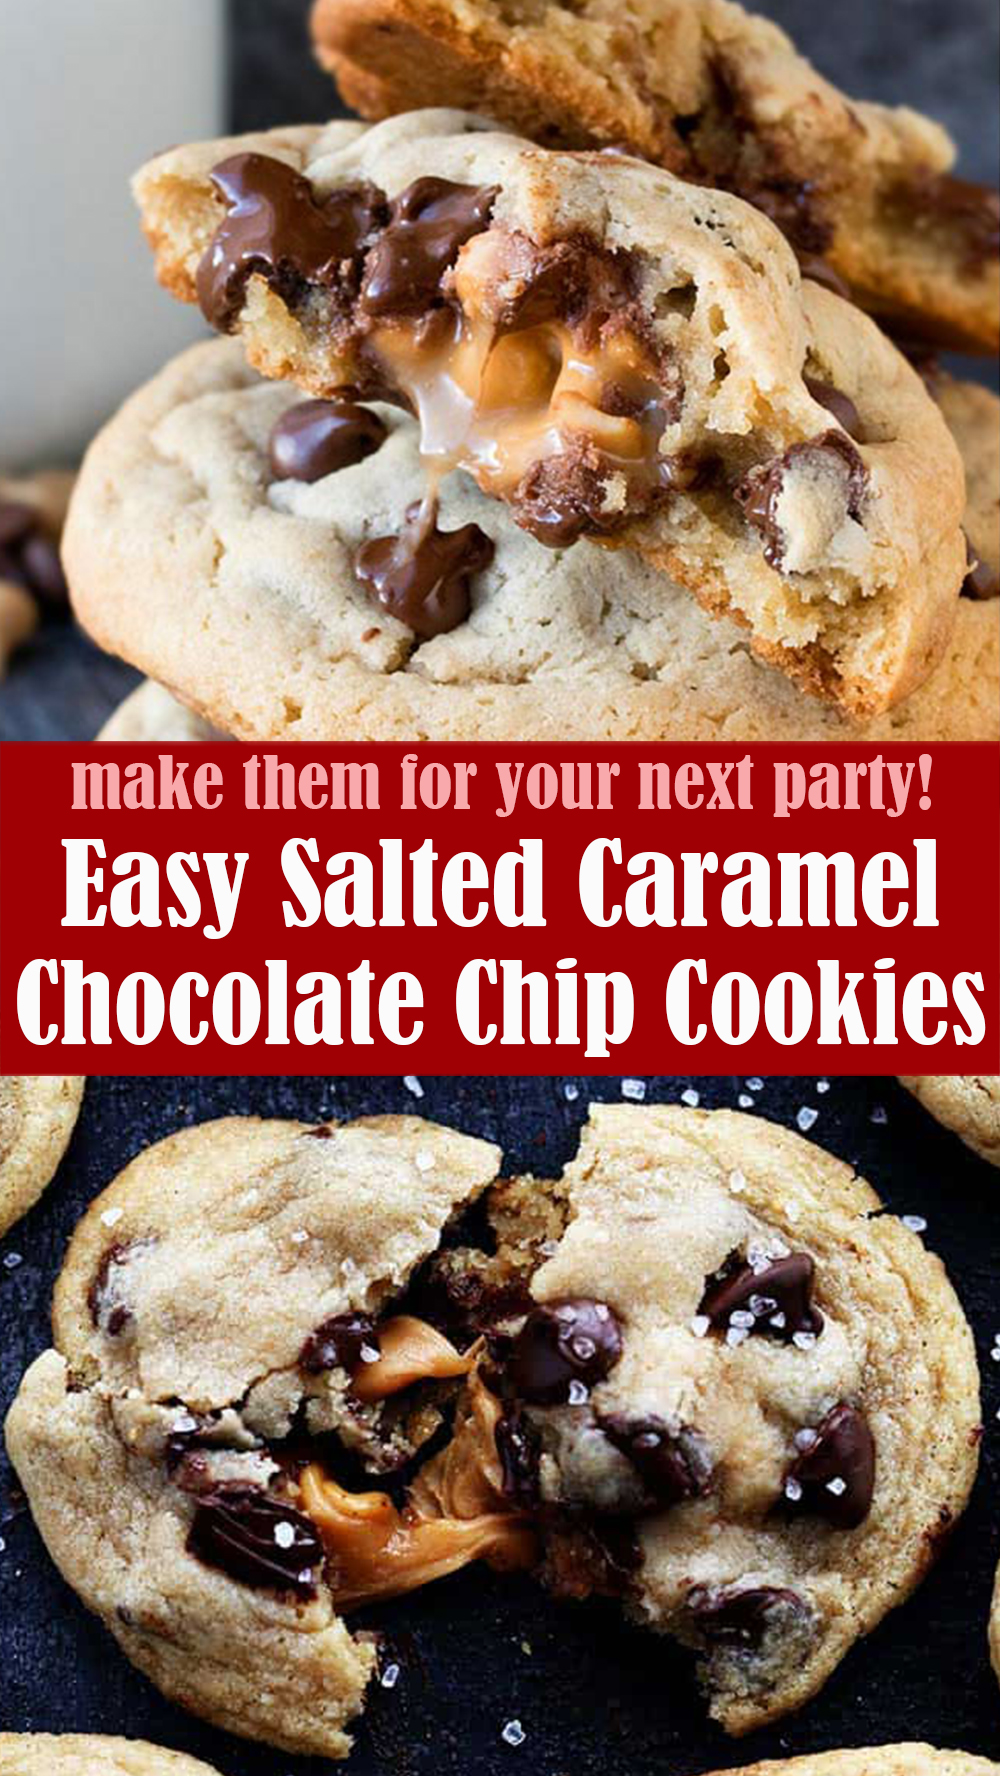 Easy Salted Caramel Chocolate Chip Cookies